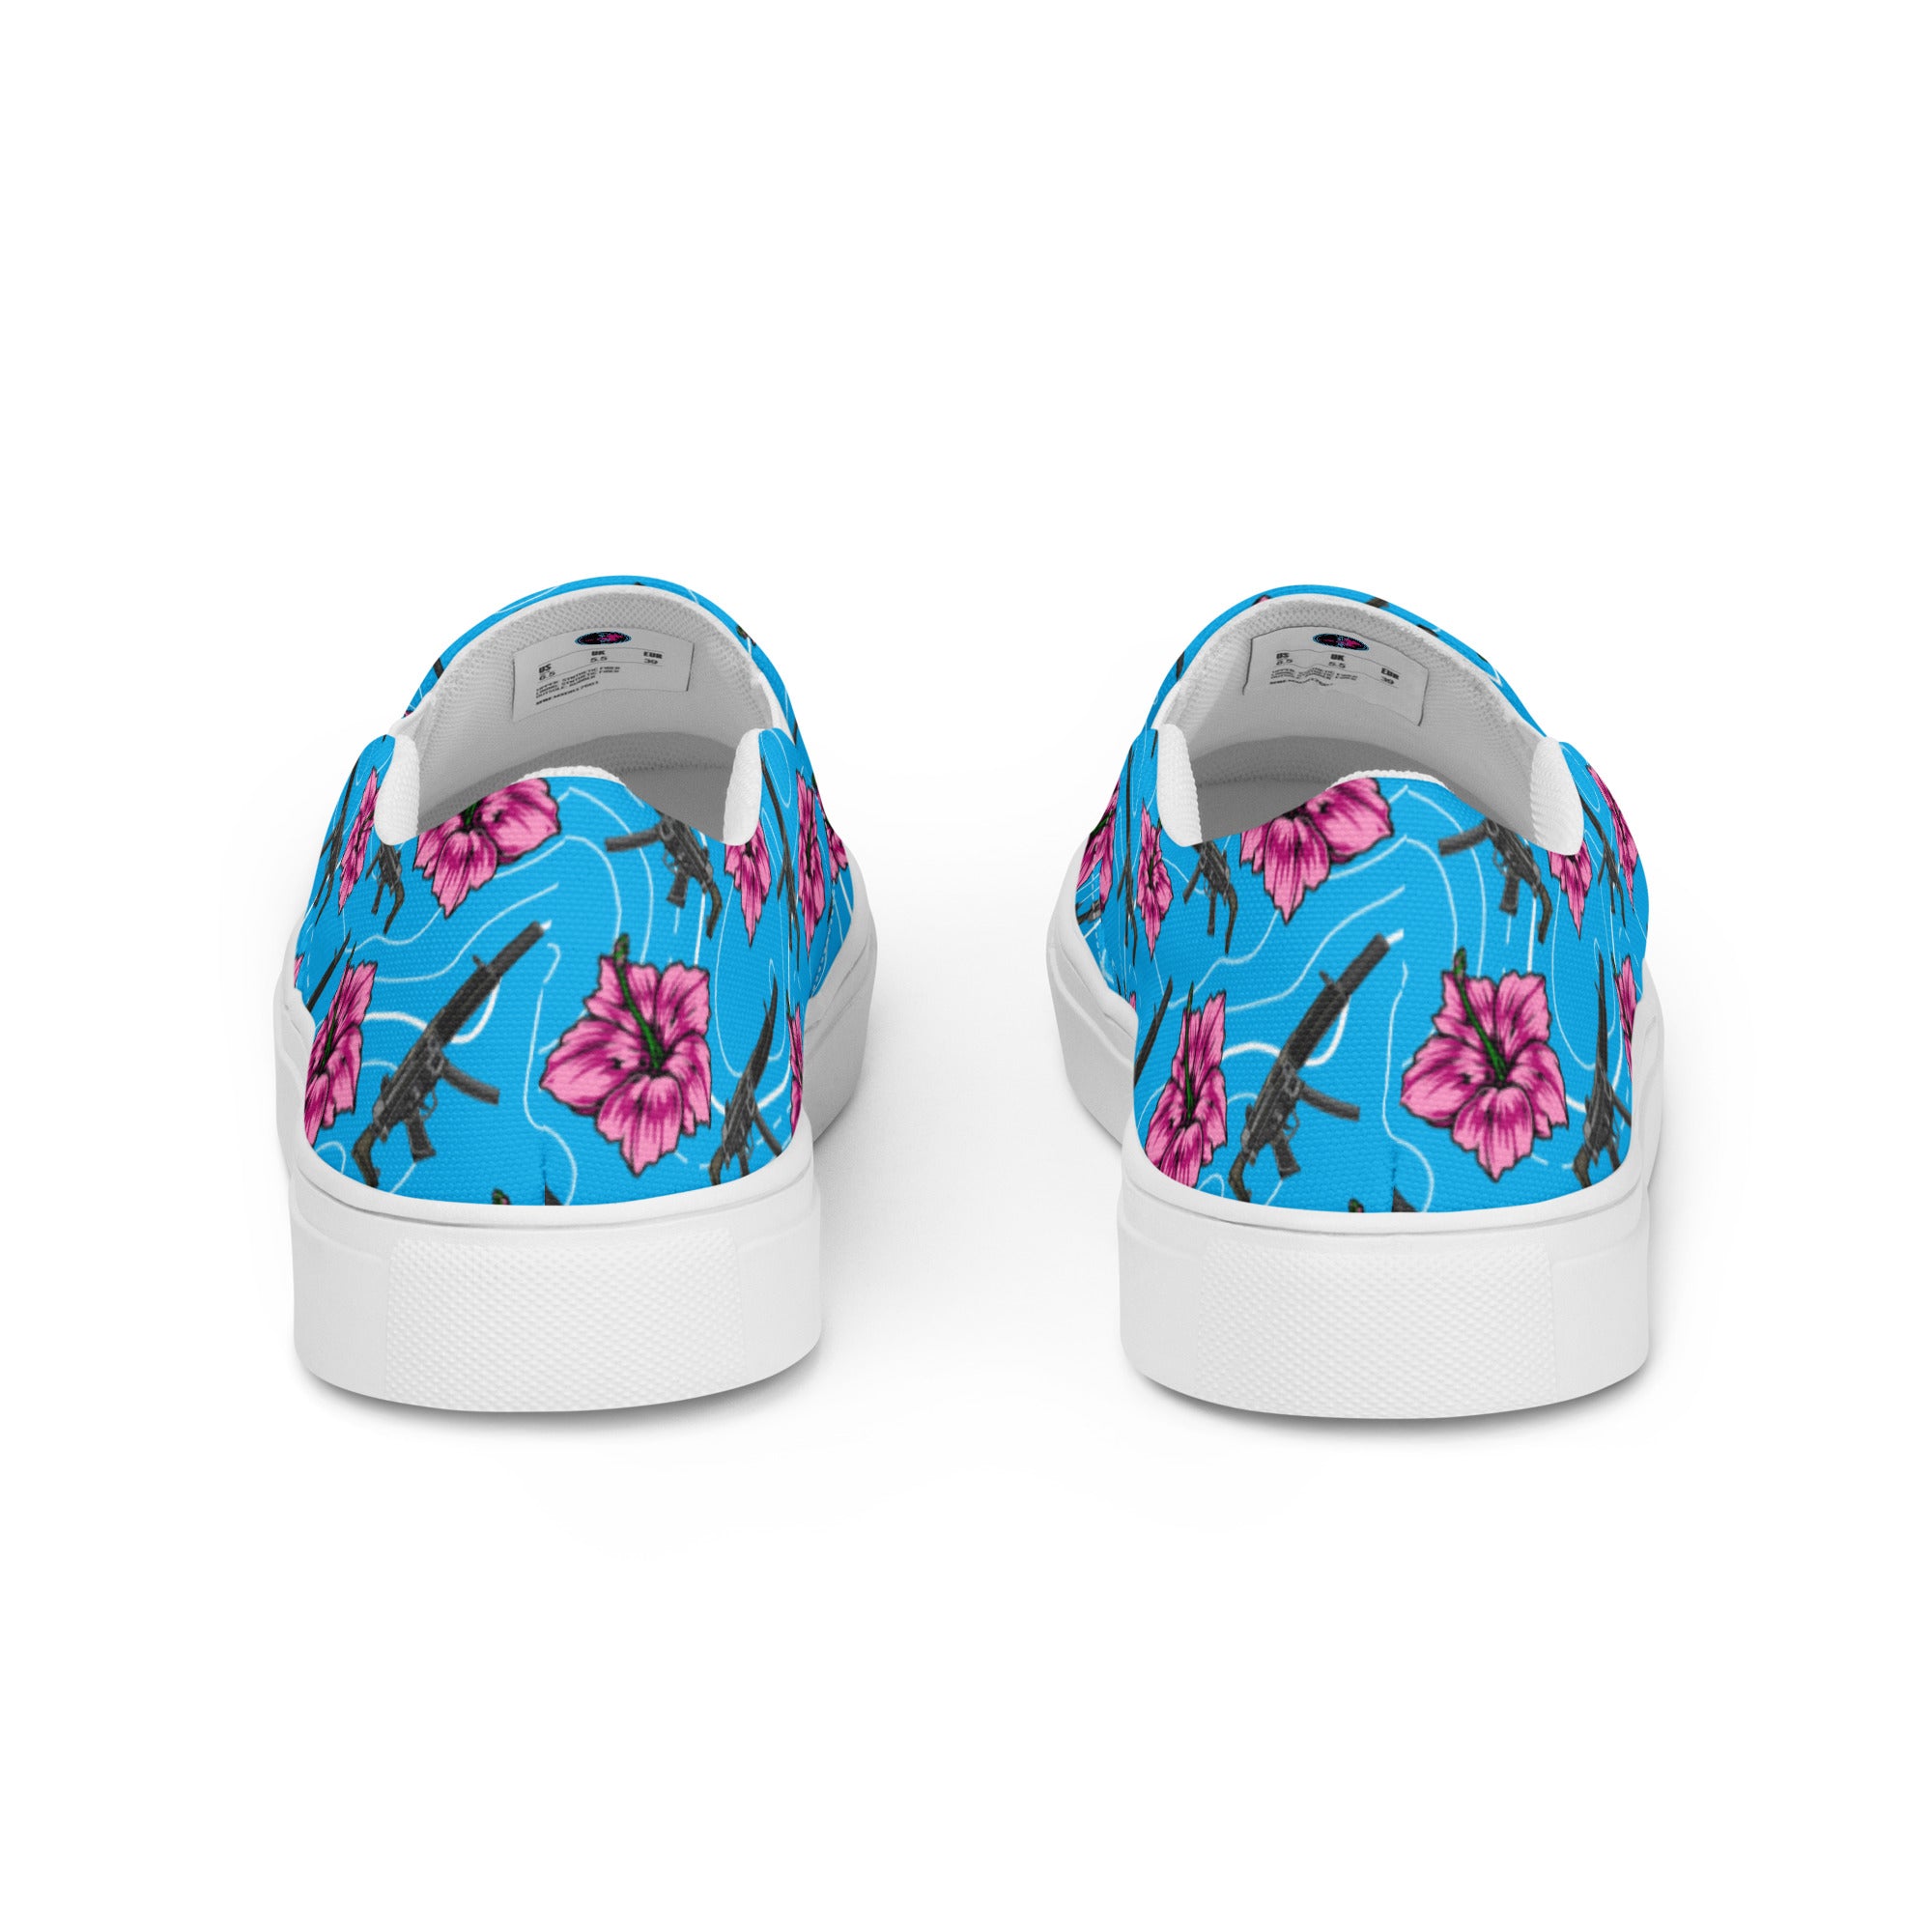 Rad Palm High Capacity Hibiscus Blue Women’s Slip On Canvas Shoes